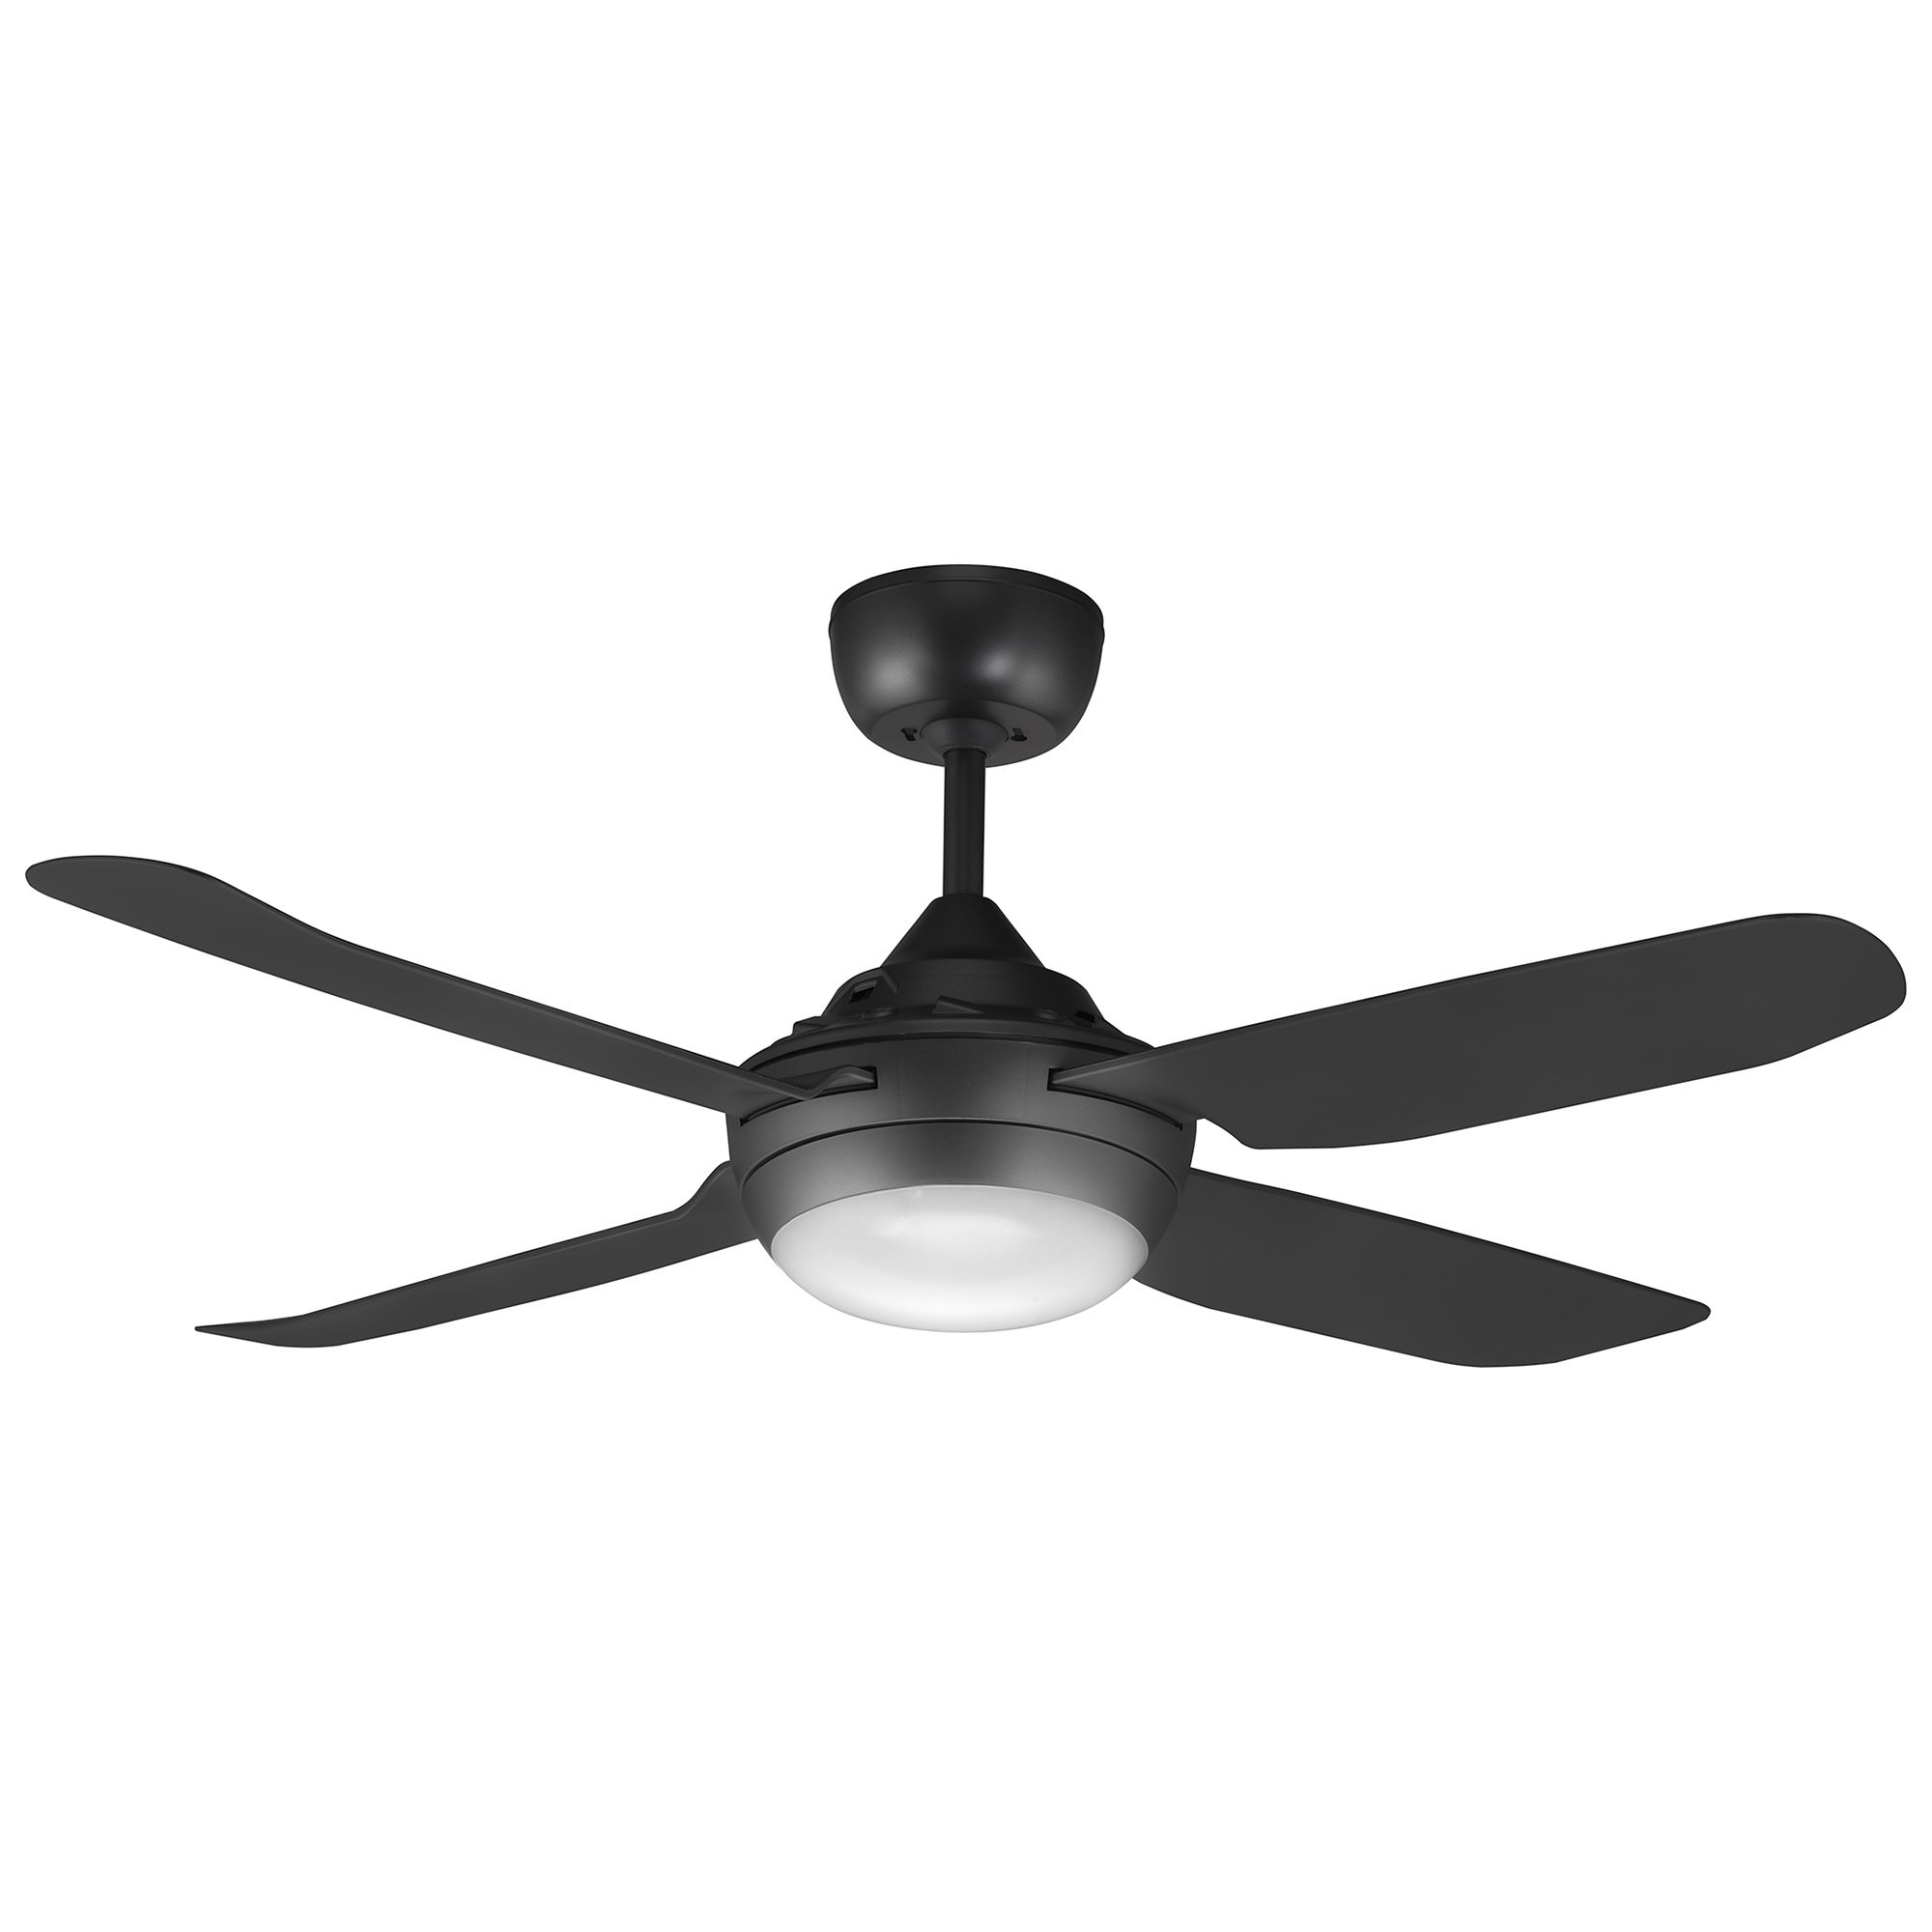 Ventair Spinika Commercial Grade Indoor / Outdoor Ceiling Fan with CCT LED Light, 122cm/48